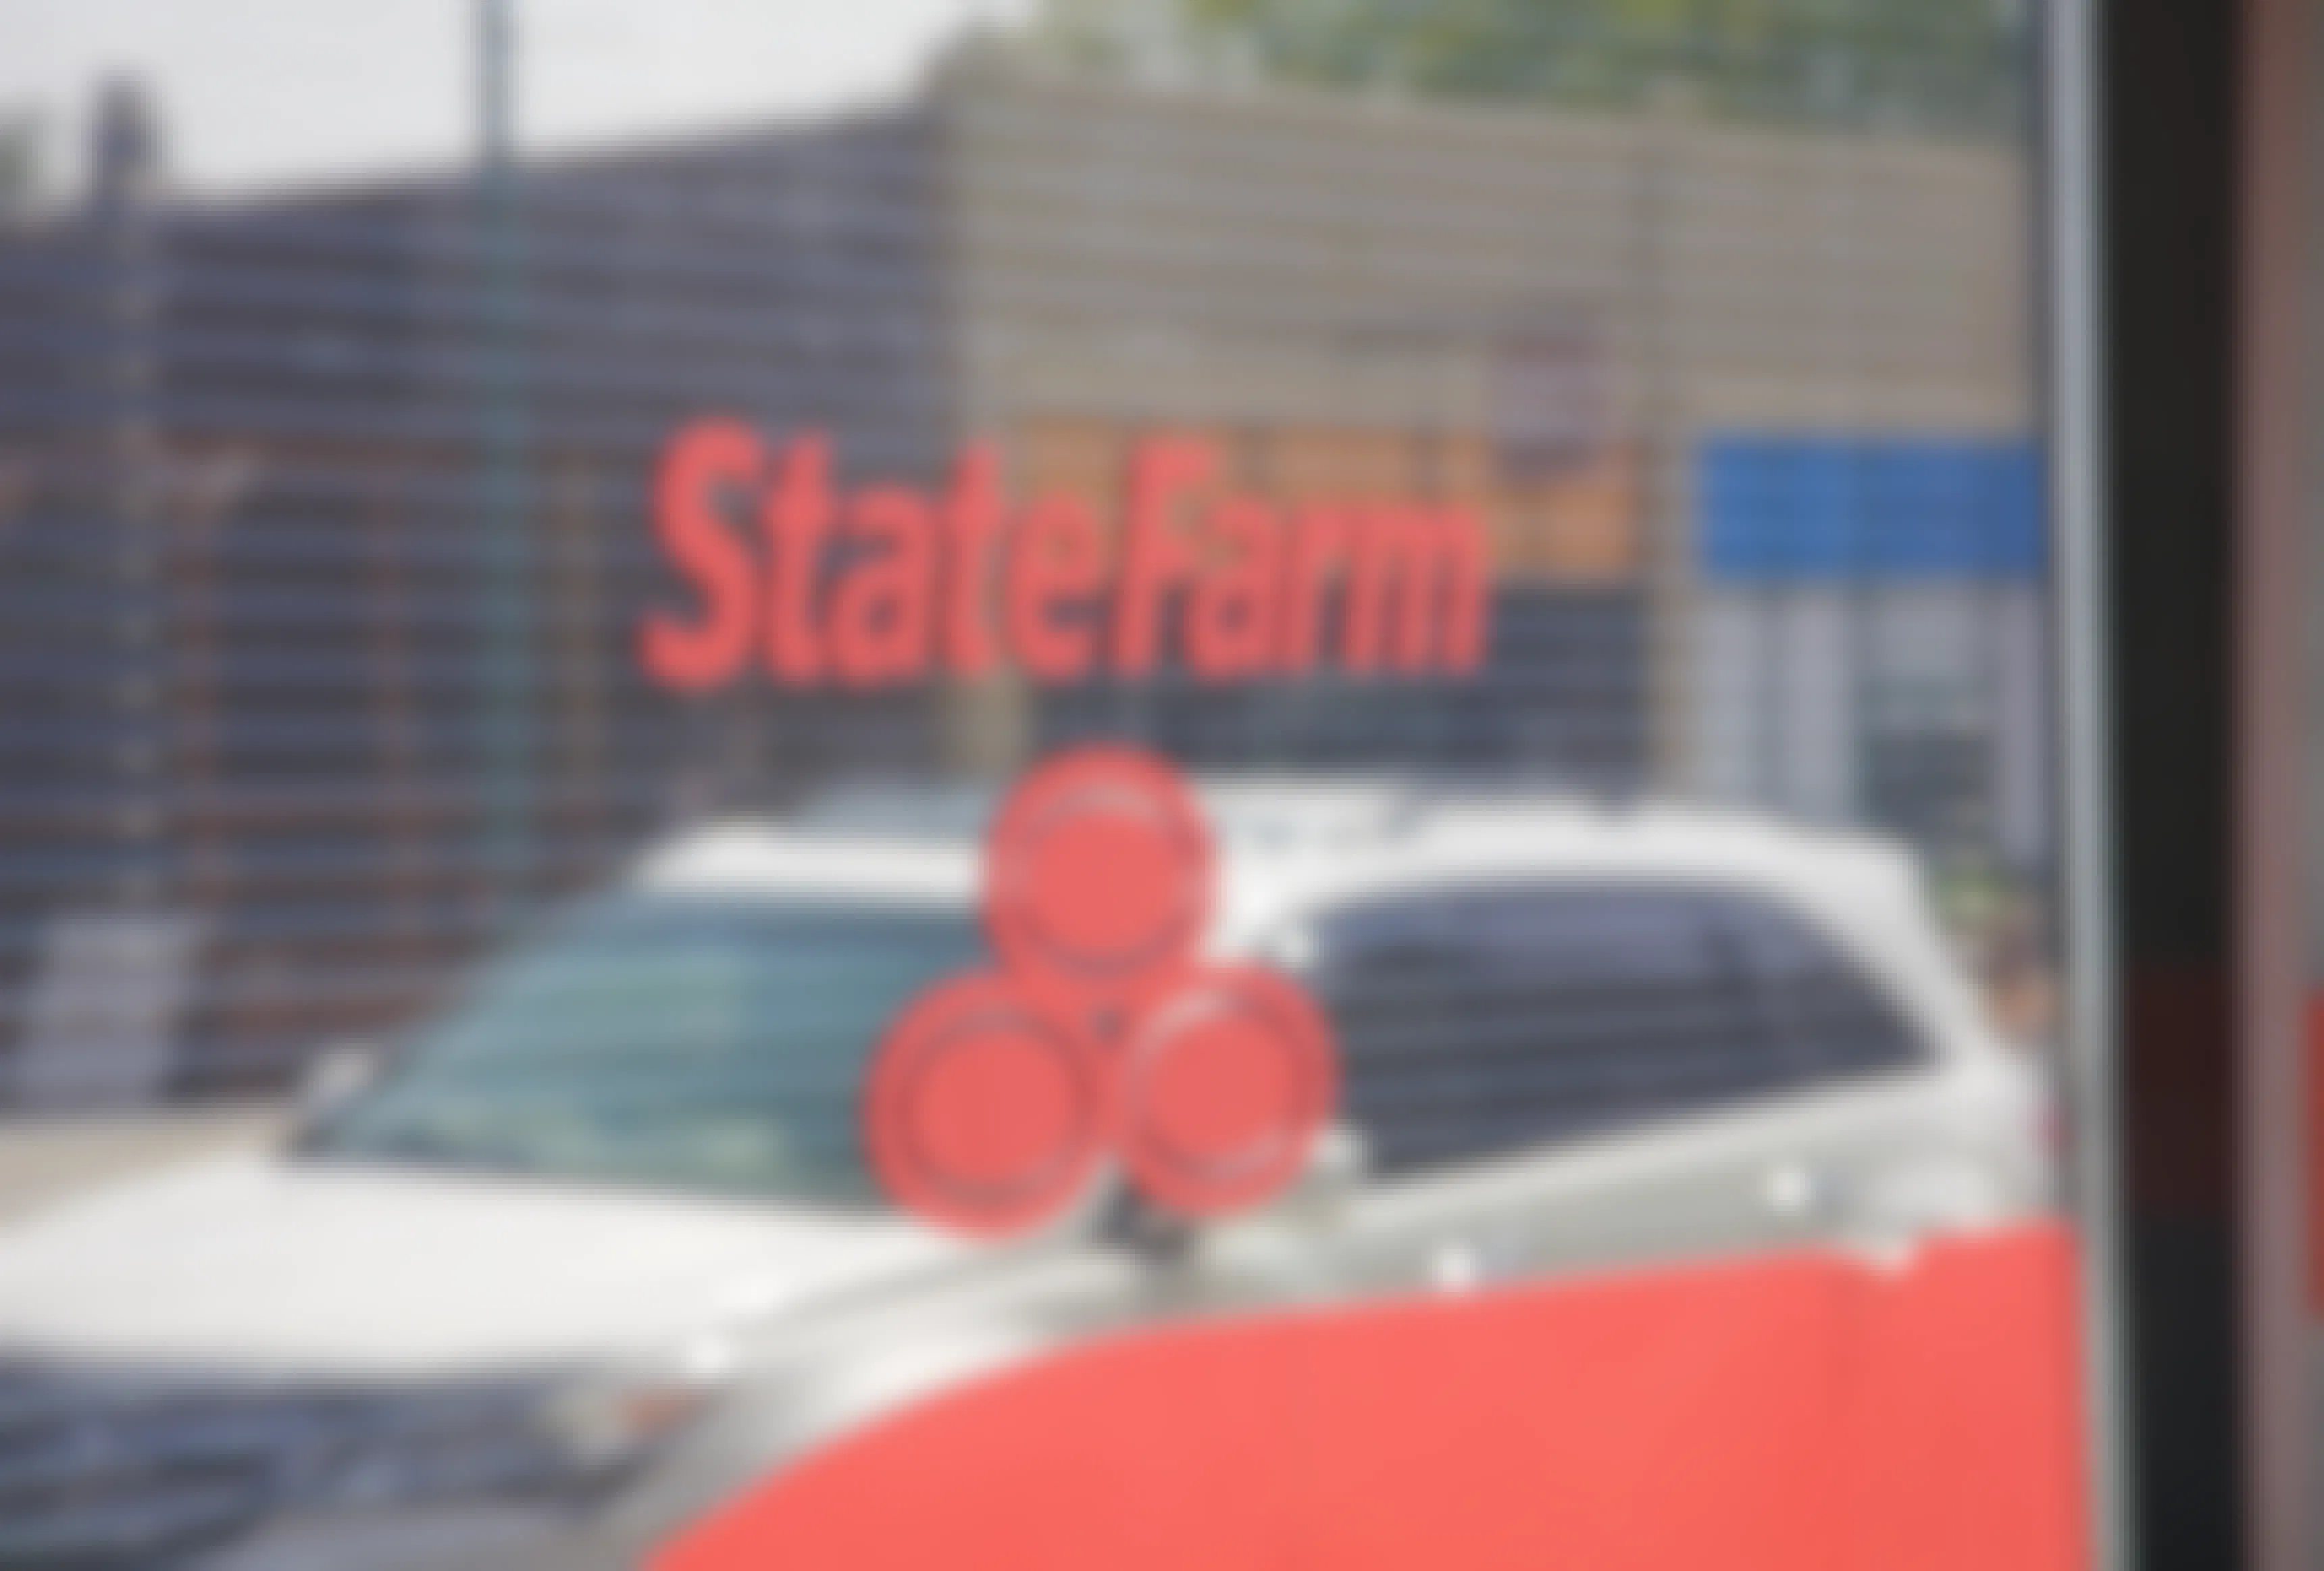 A car reflected in the window of a State Farm building